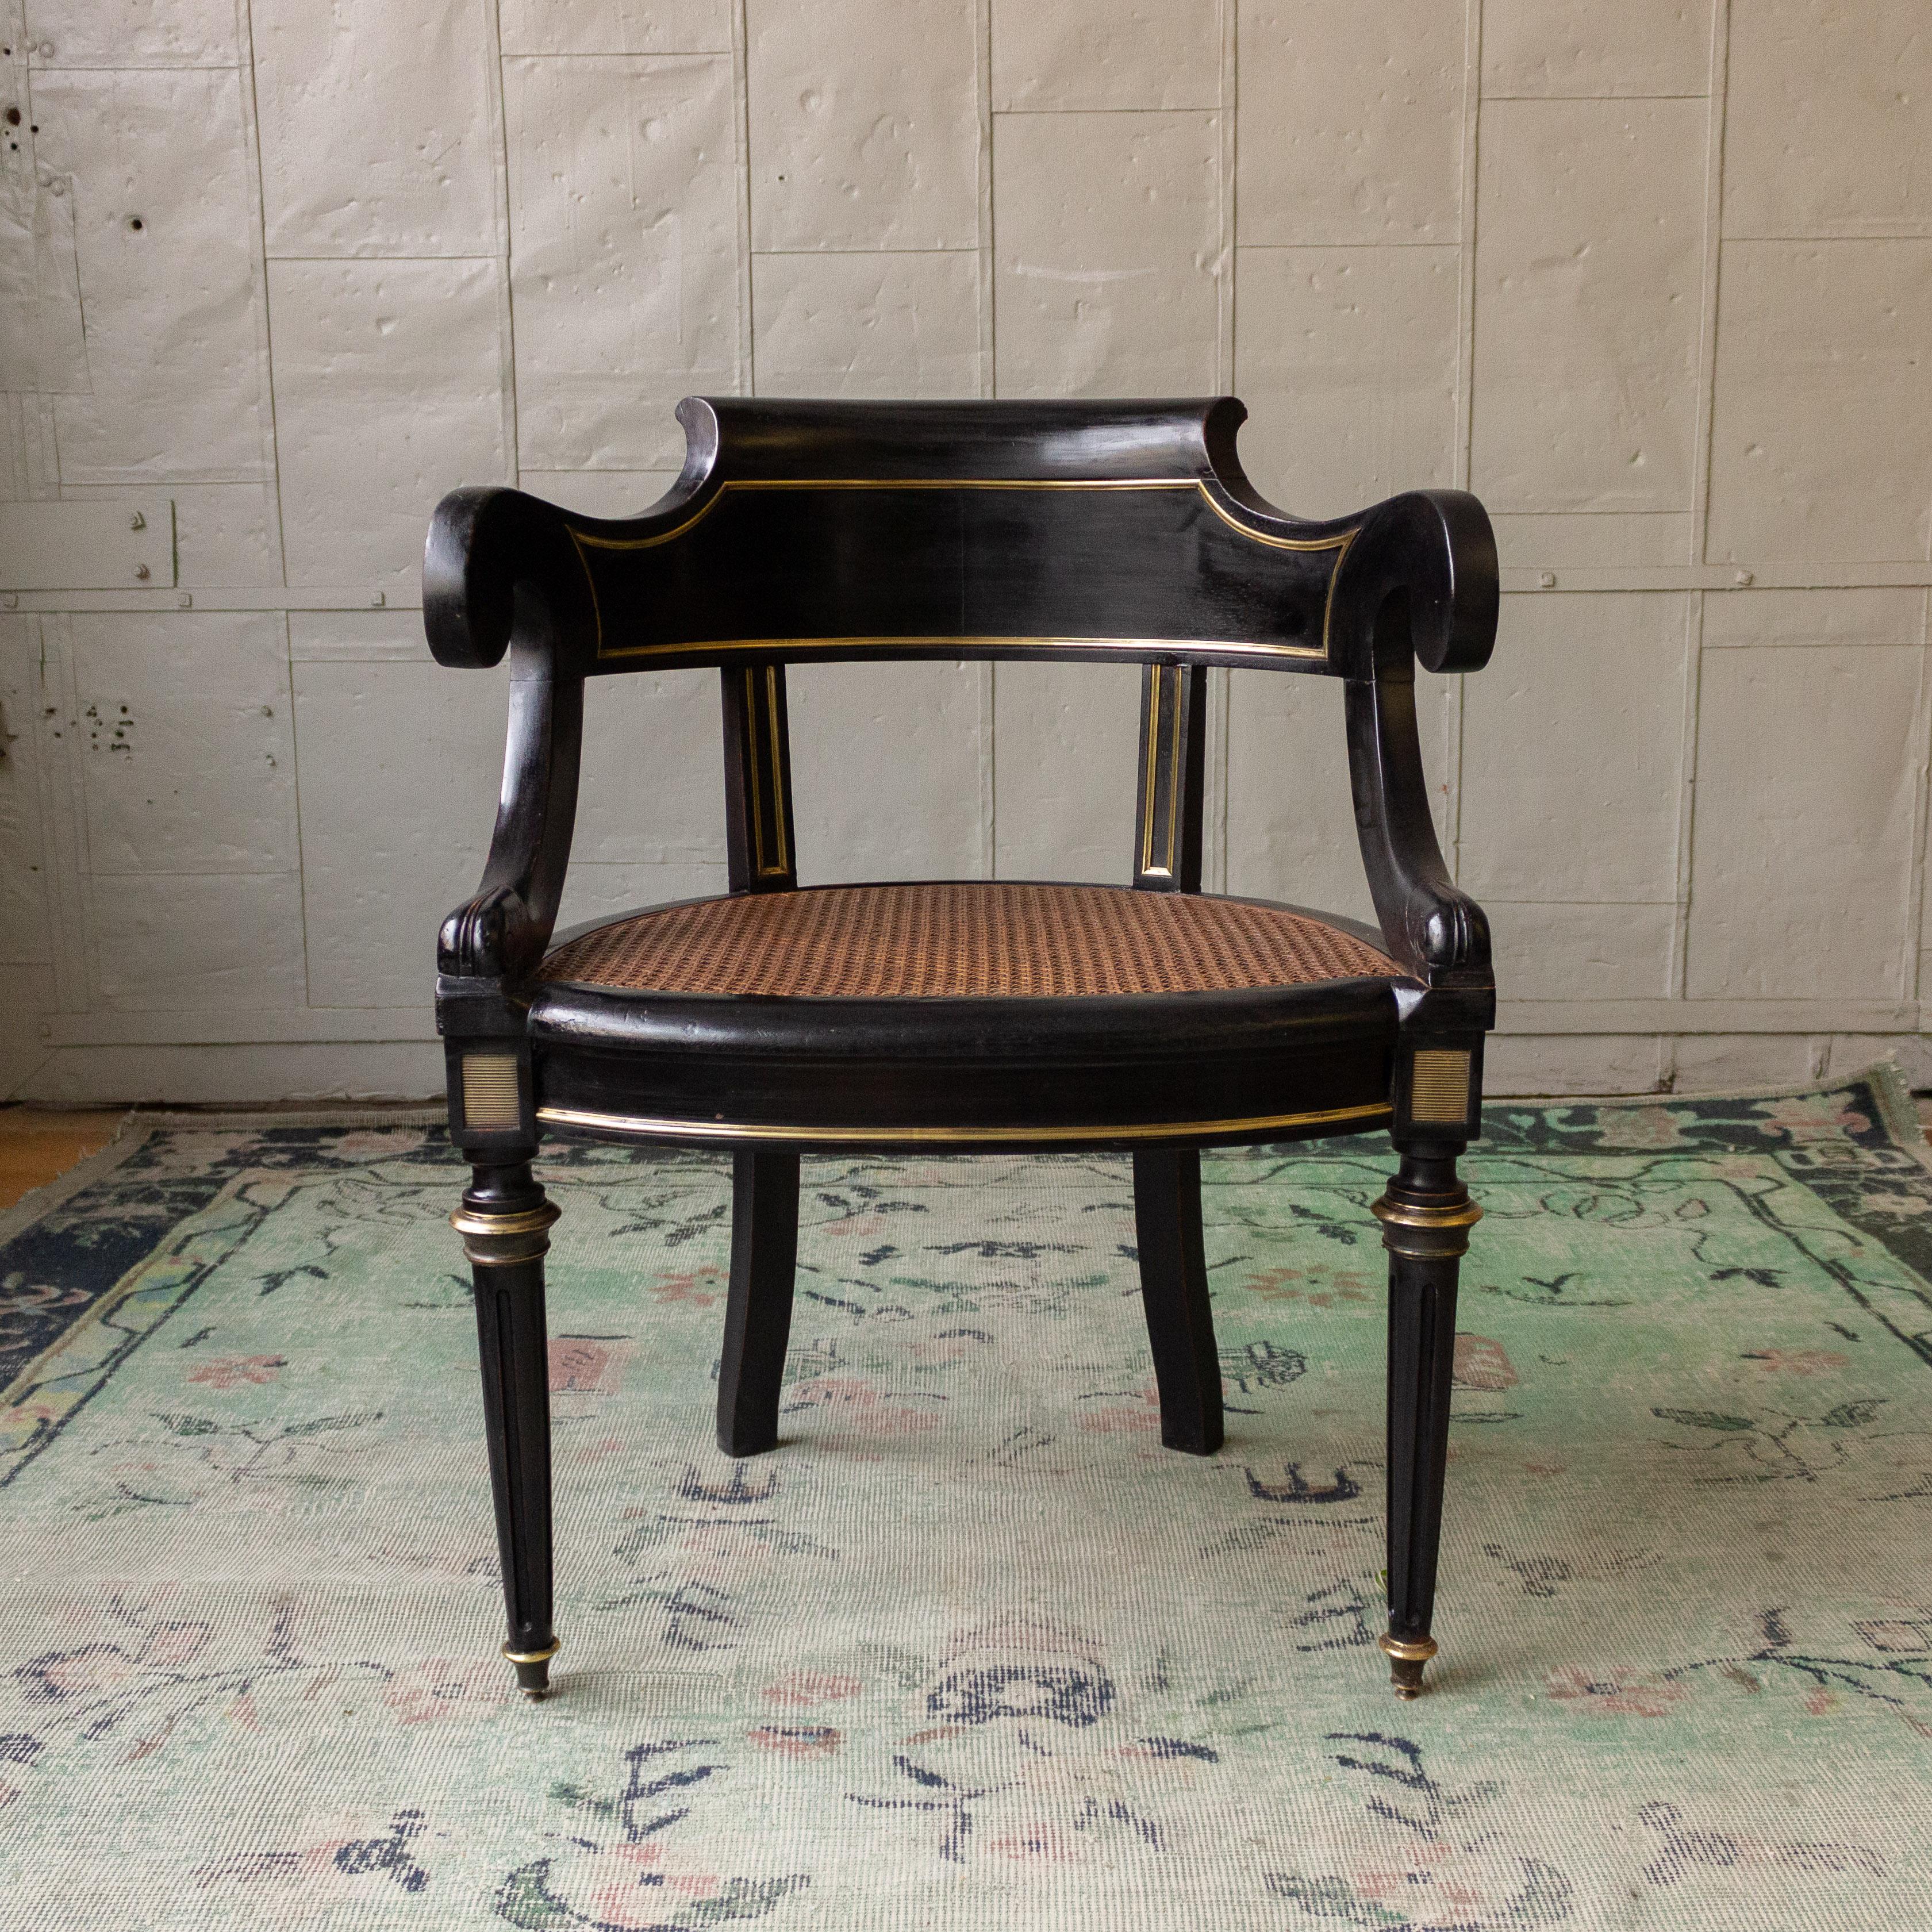 Early 20th Century French Ebonized Desk Chair with Caned Seat